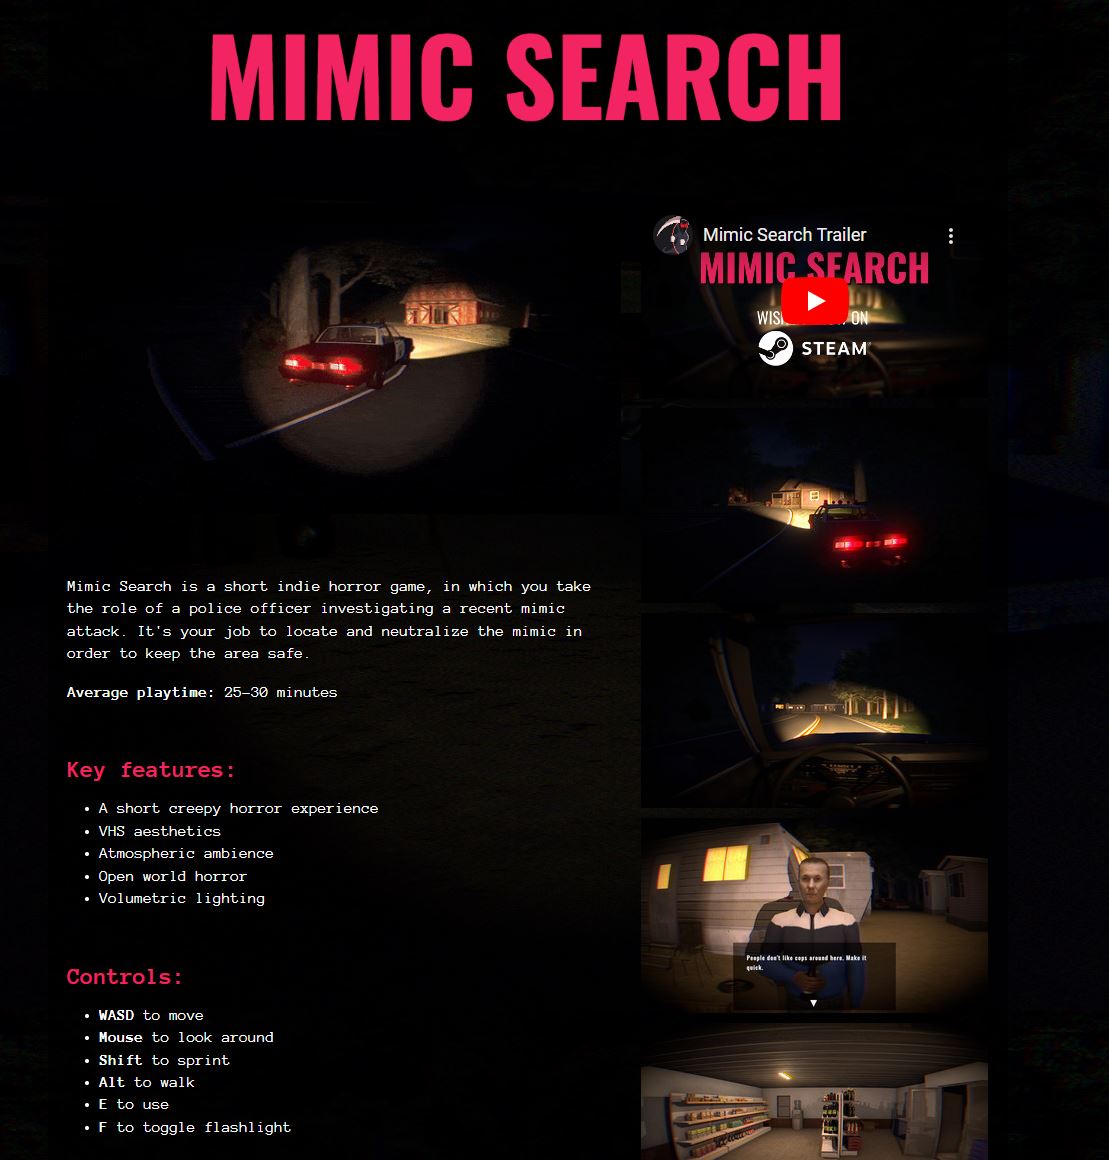 Mimic Search is now also available on ItchIO.

Try it out, if you haven't already.

Itch page is below  ⬇️